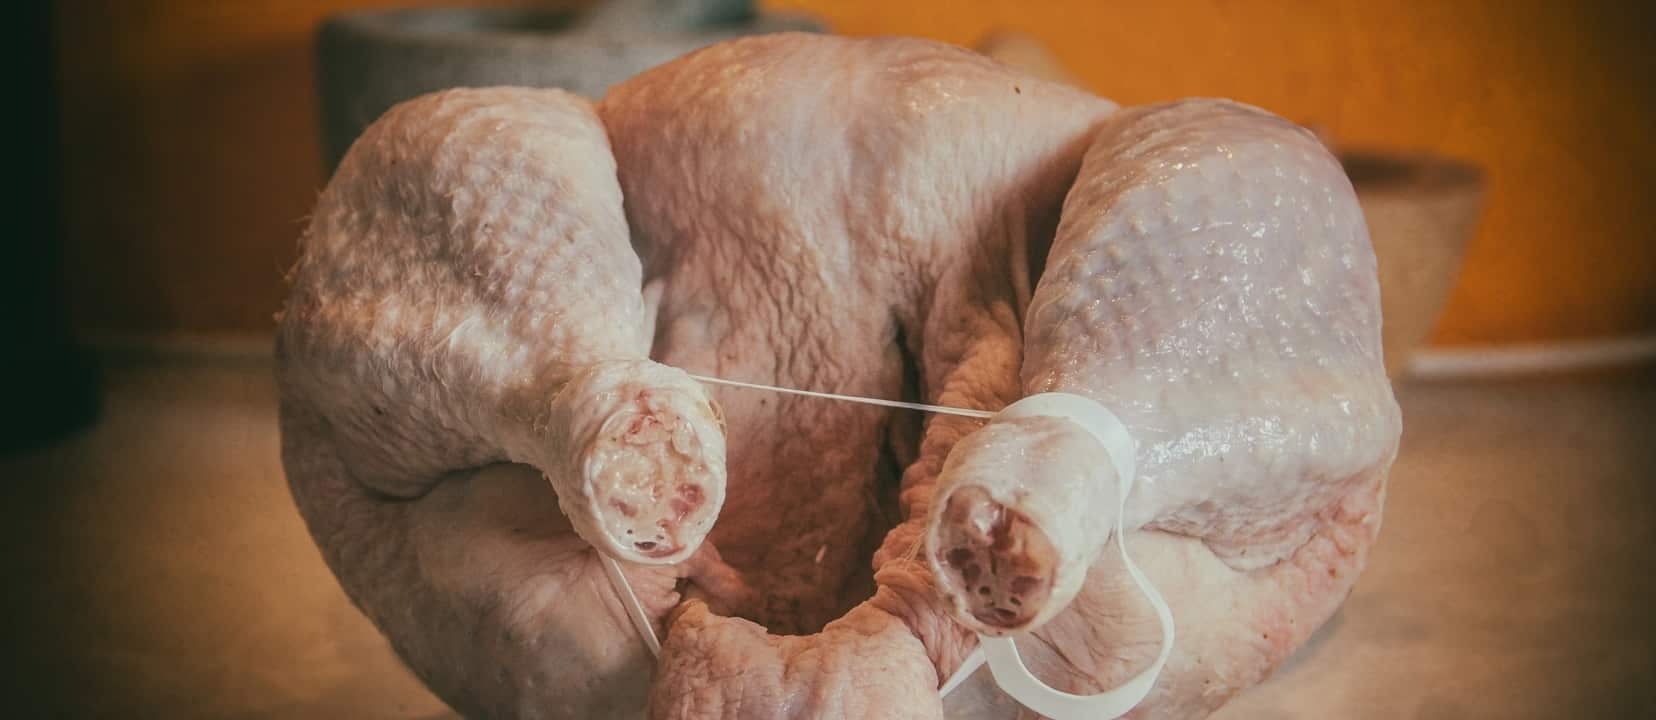 Virus in Chicken Could Be Linked to Obesity